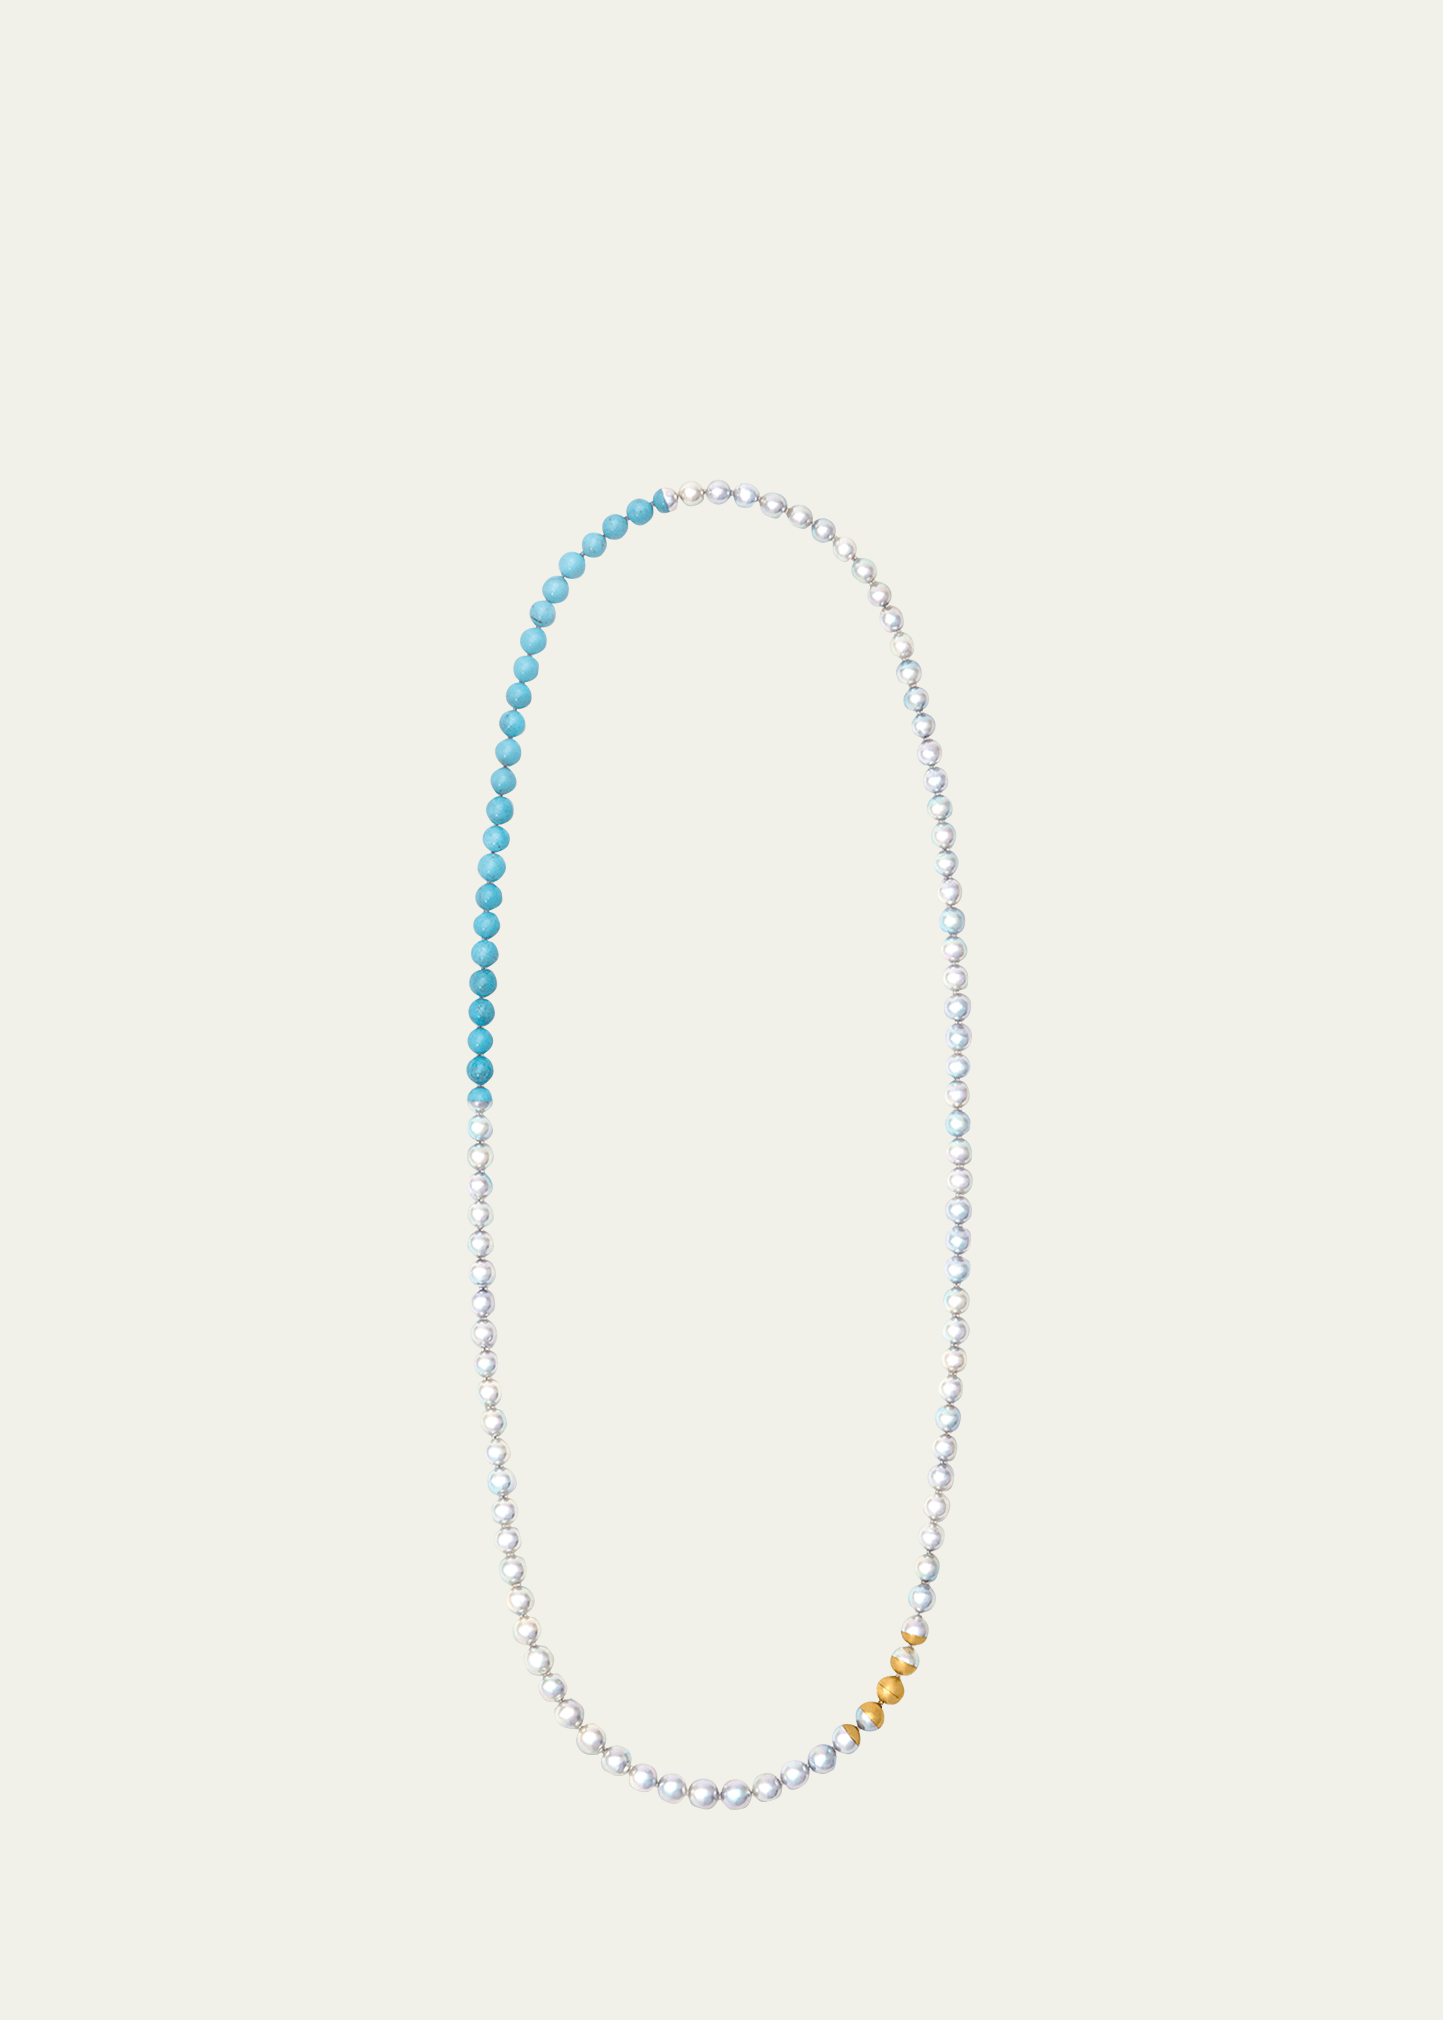 Yutai Long Sectional Pearl Necklace With Turquoise In Yg